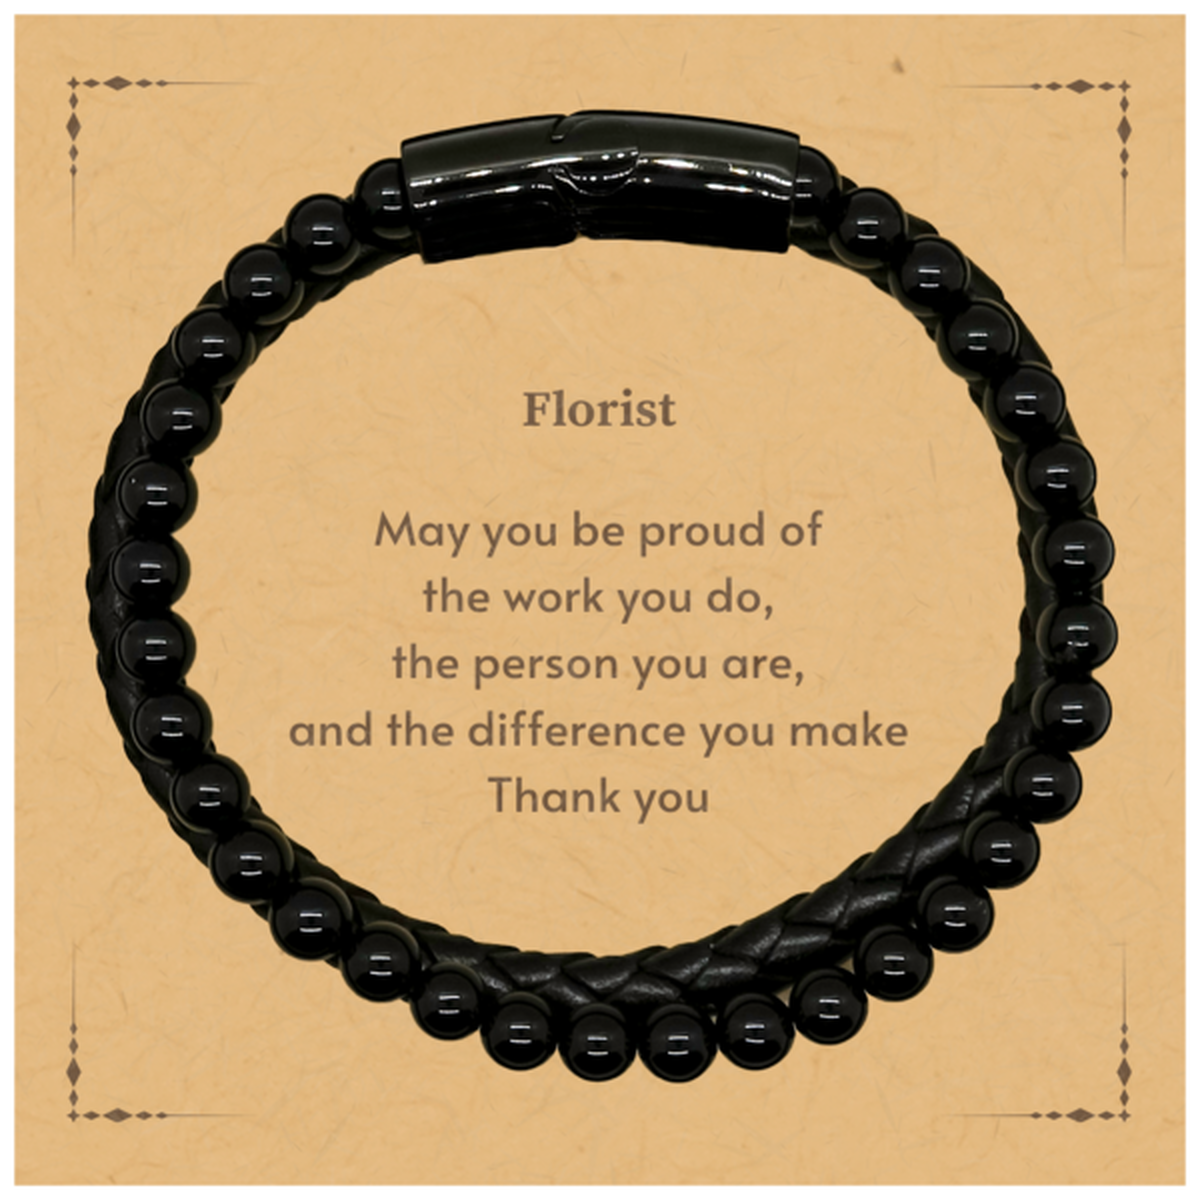 Heartwarming Stone Leather Bracelets Retirement Coworkers Gifts for Florist, Florist May You be proud of the work you do, the person you are Gifts for Boss Men Women Friends